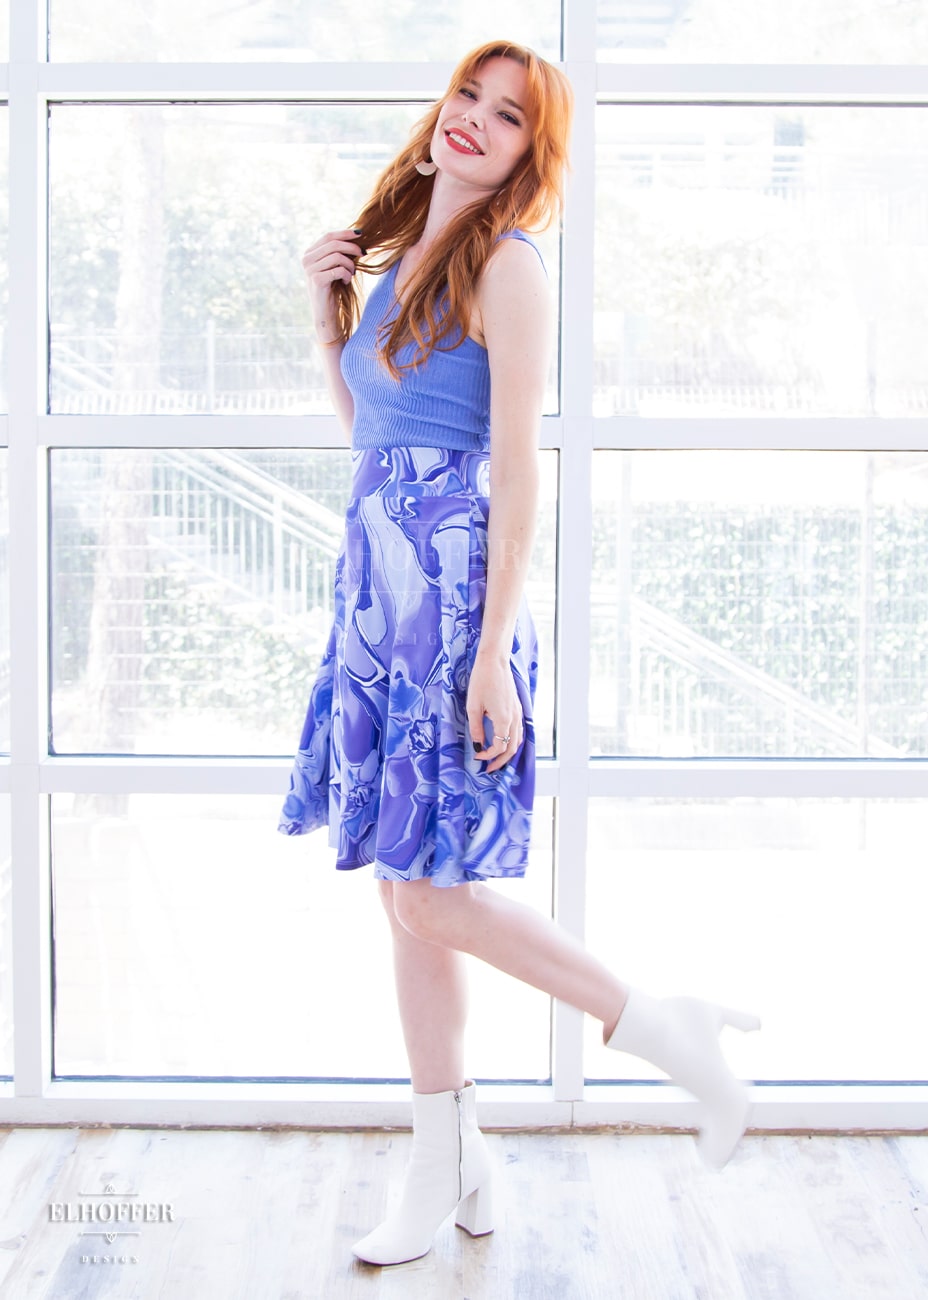 Chloe, a fair skinned size XS model with red hair and bangs, wears a high-waisted knee length full skirt with a fitted matching waistband encased with elastic in our periwinkle marble print. The periwinkle marble print is a marbled blue, purple, and white pattern all over it.